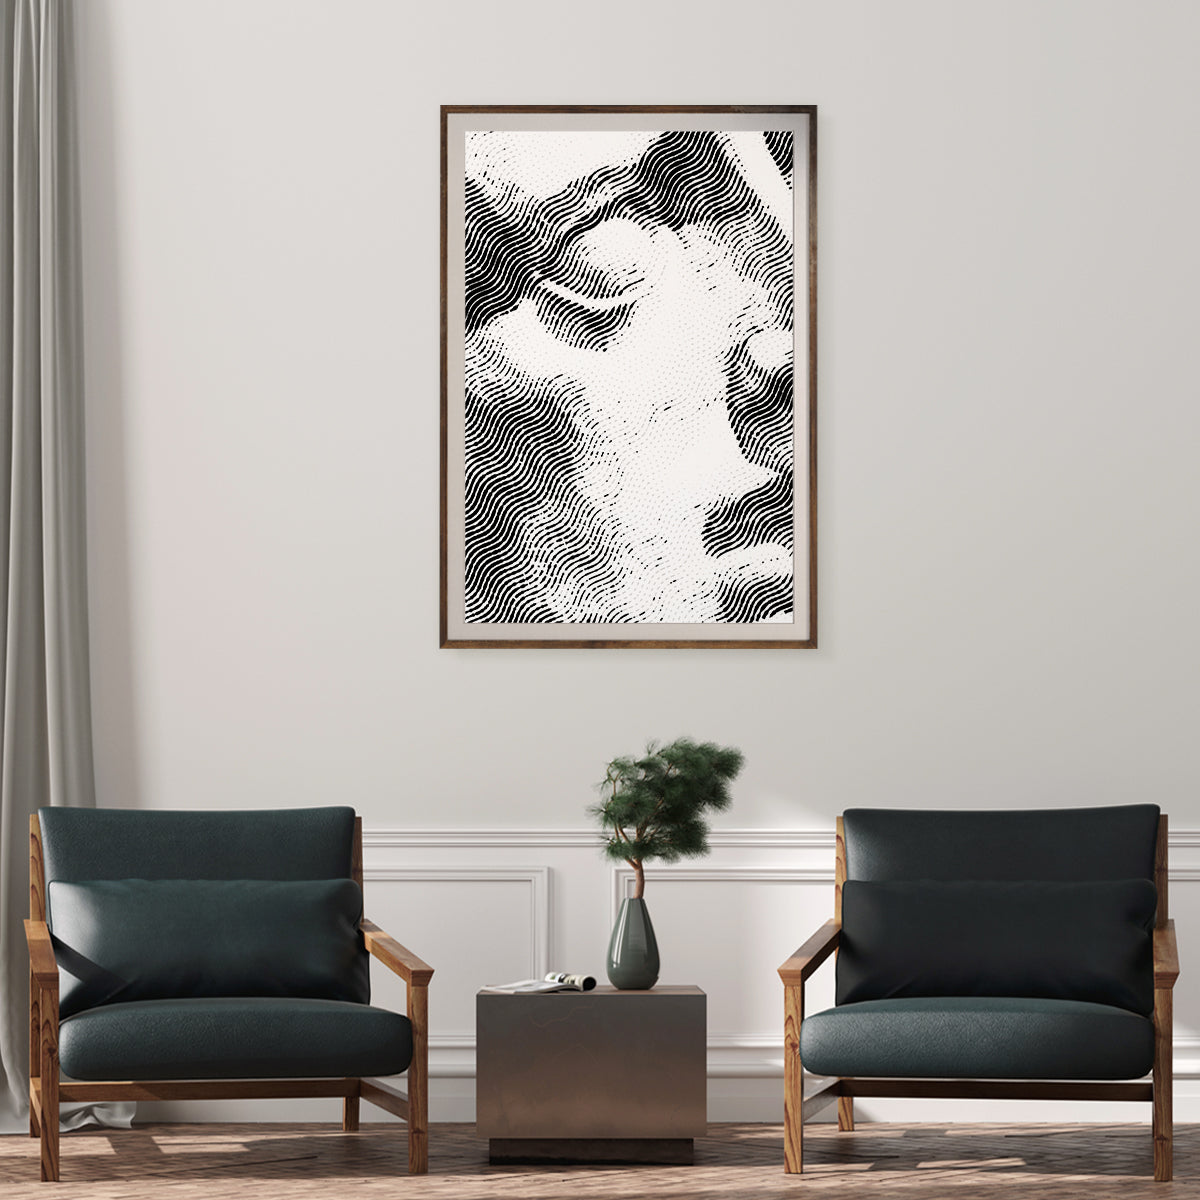 Ancient Greek Minimalist Portrait Black And White Poster Art Decor-Vertical Posters NOT FRAMED-CetArt-8″x10″ inches-CetArt